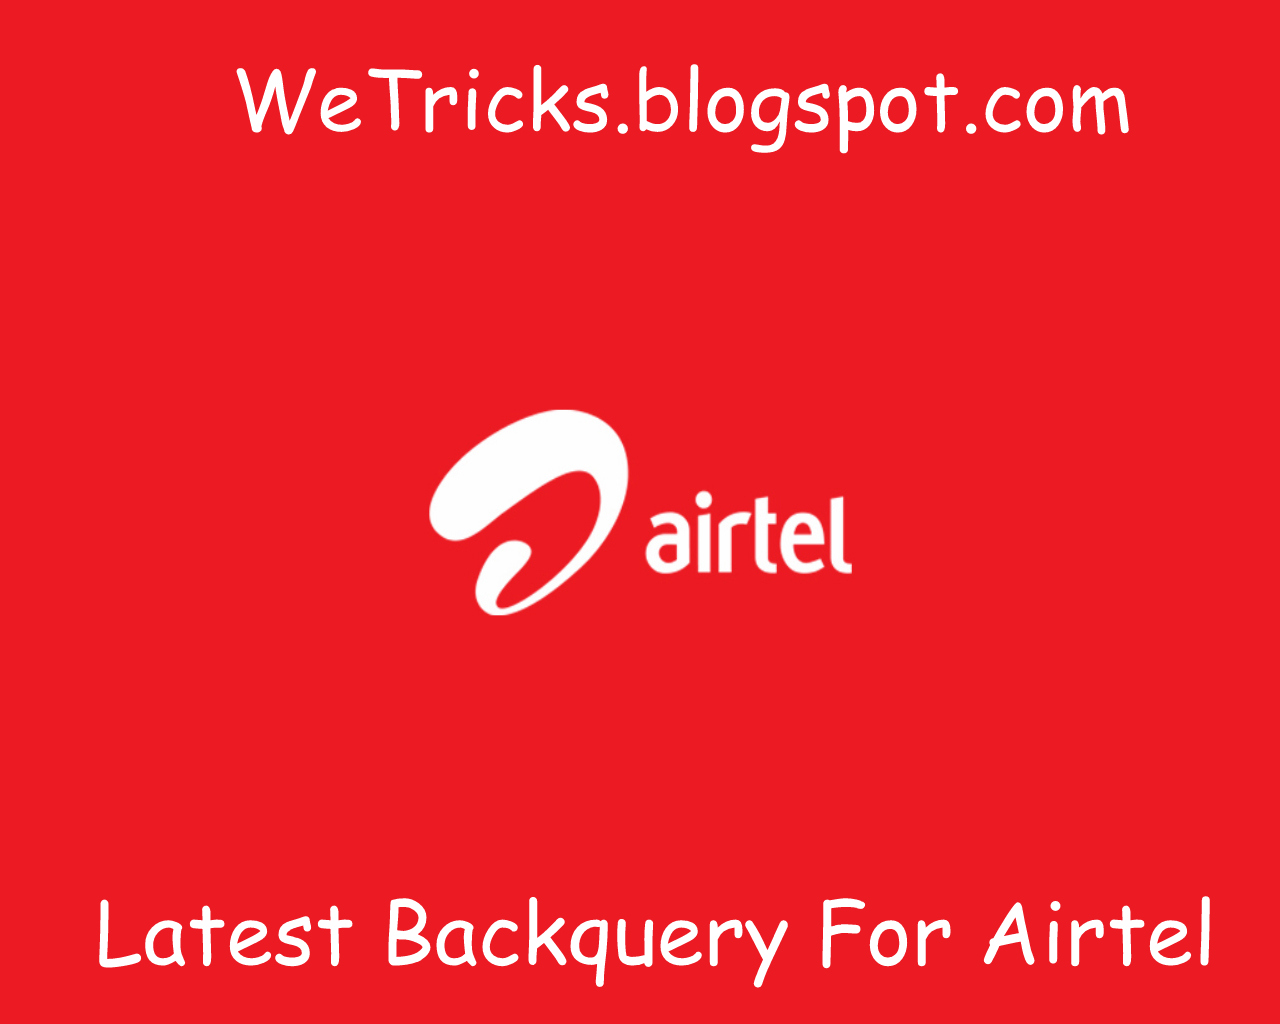 Backquery For Airtel We Tricks